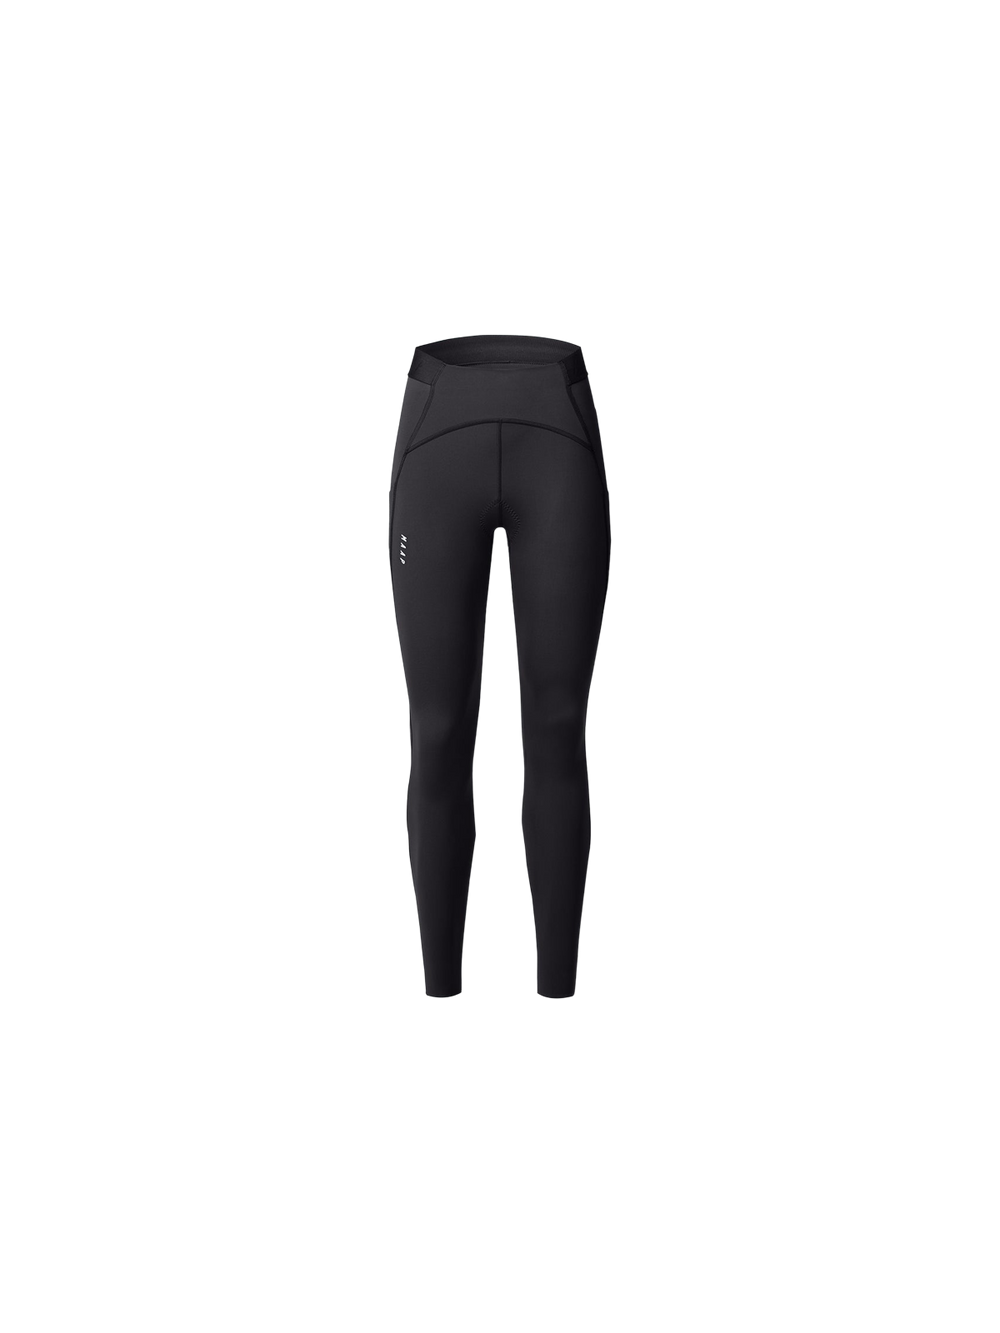 Product Image for Women's Sequence Legging